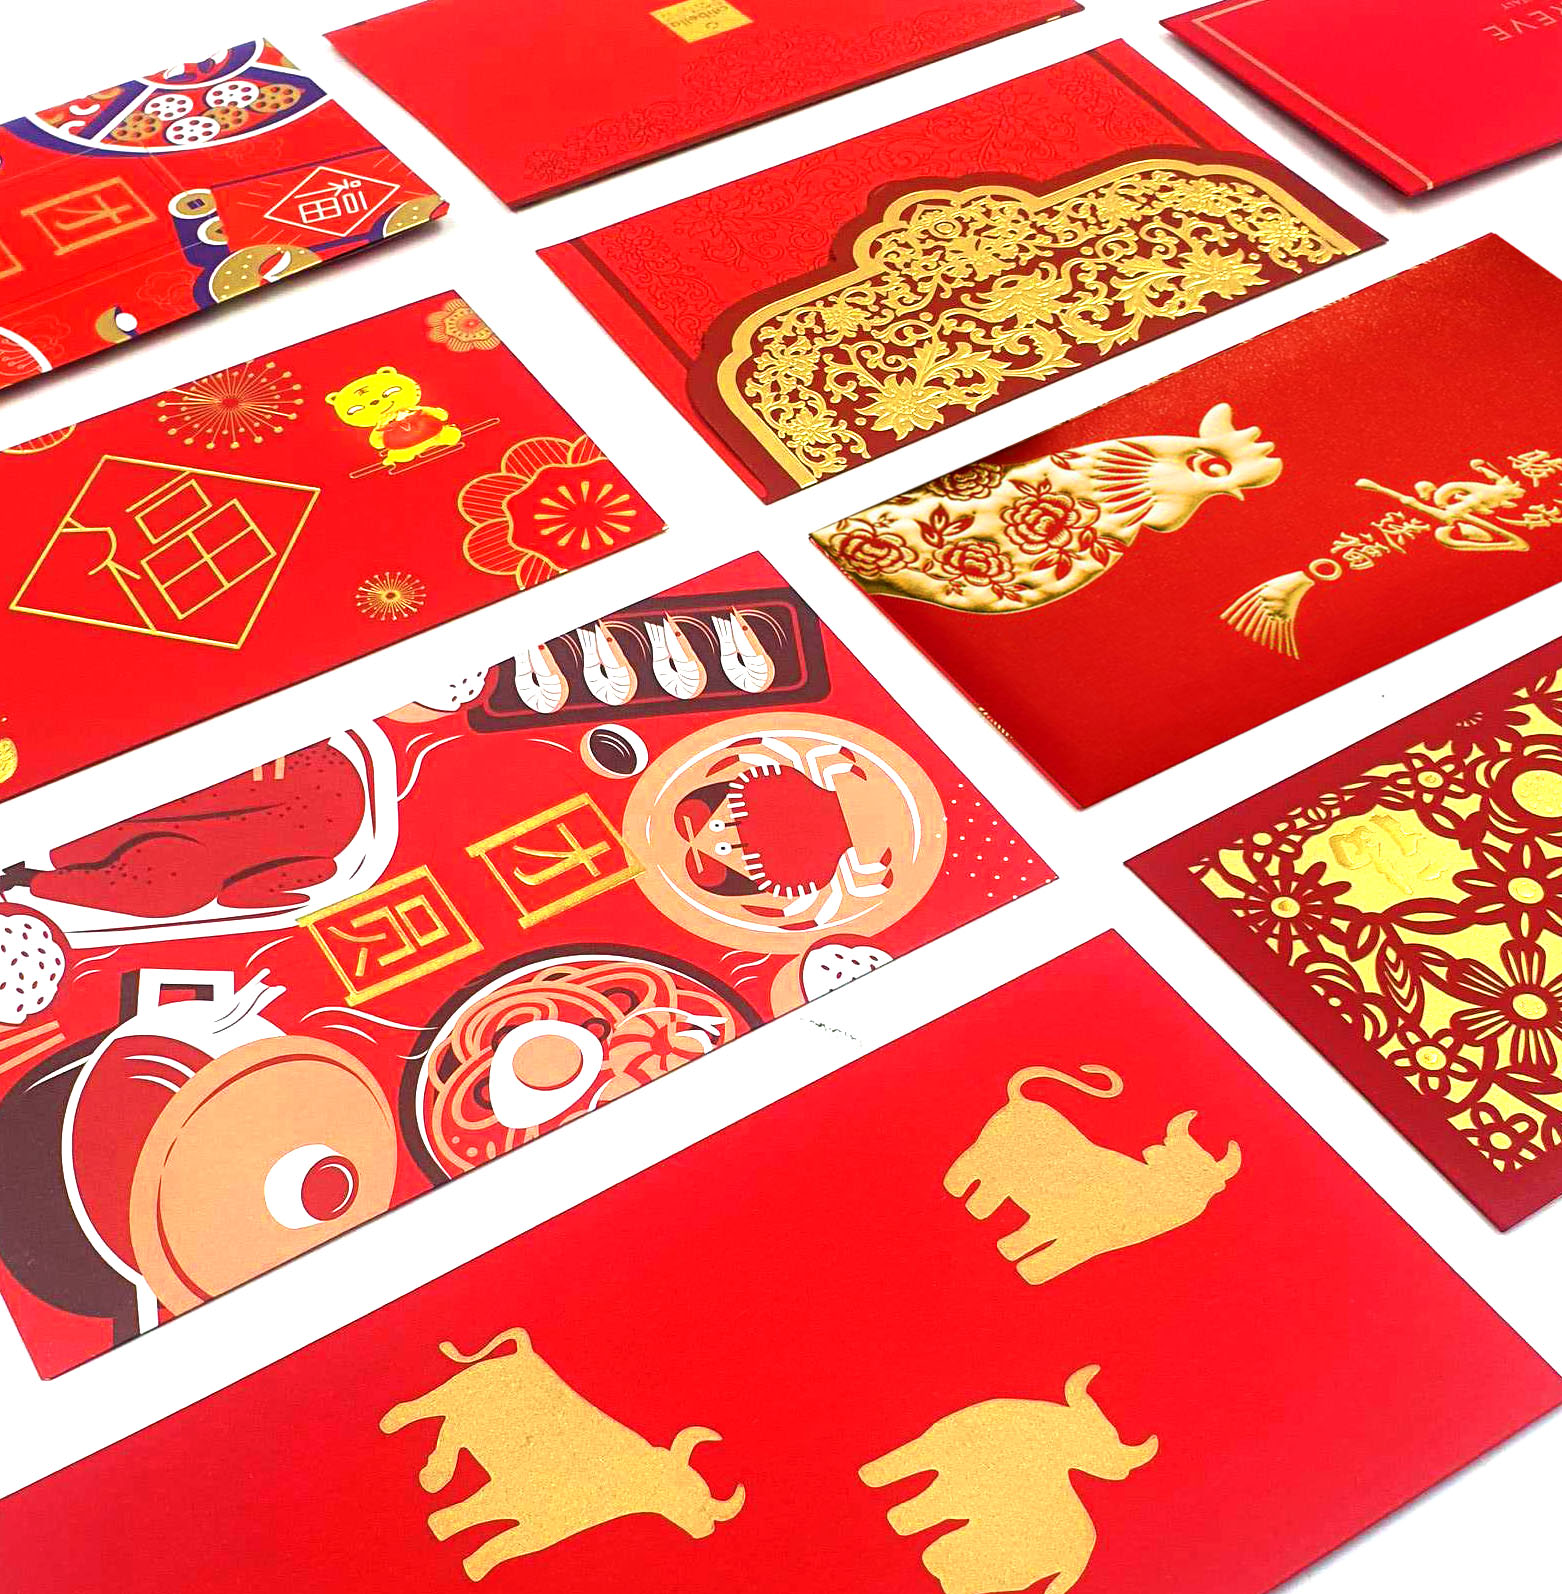 These Sustainable Red Envelopes For Chinese New Year are Designed